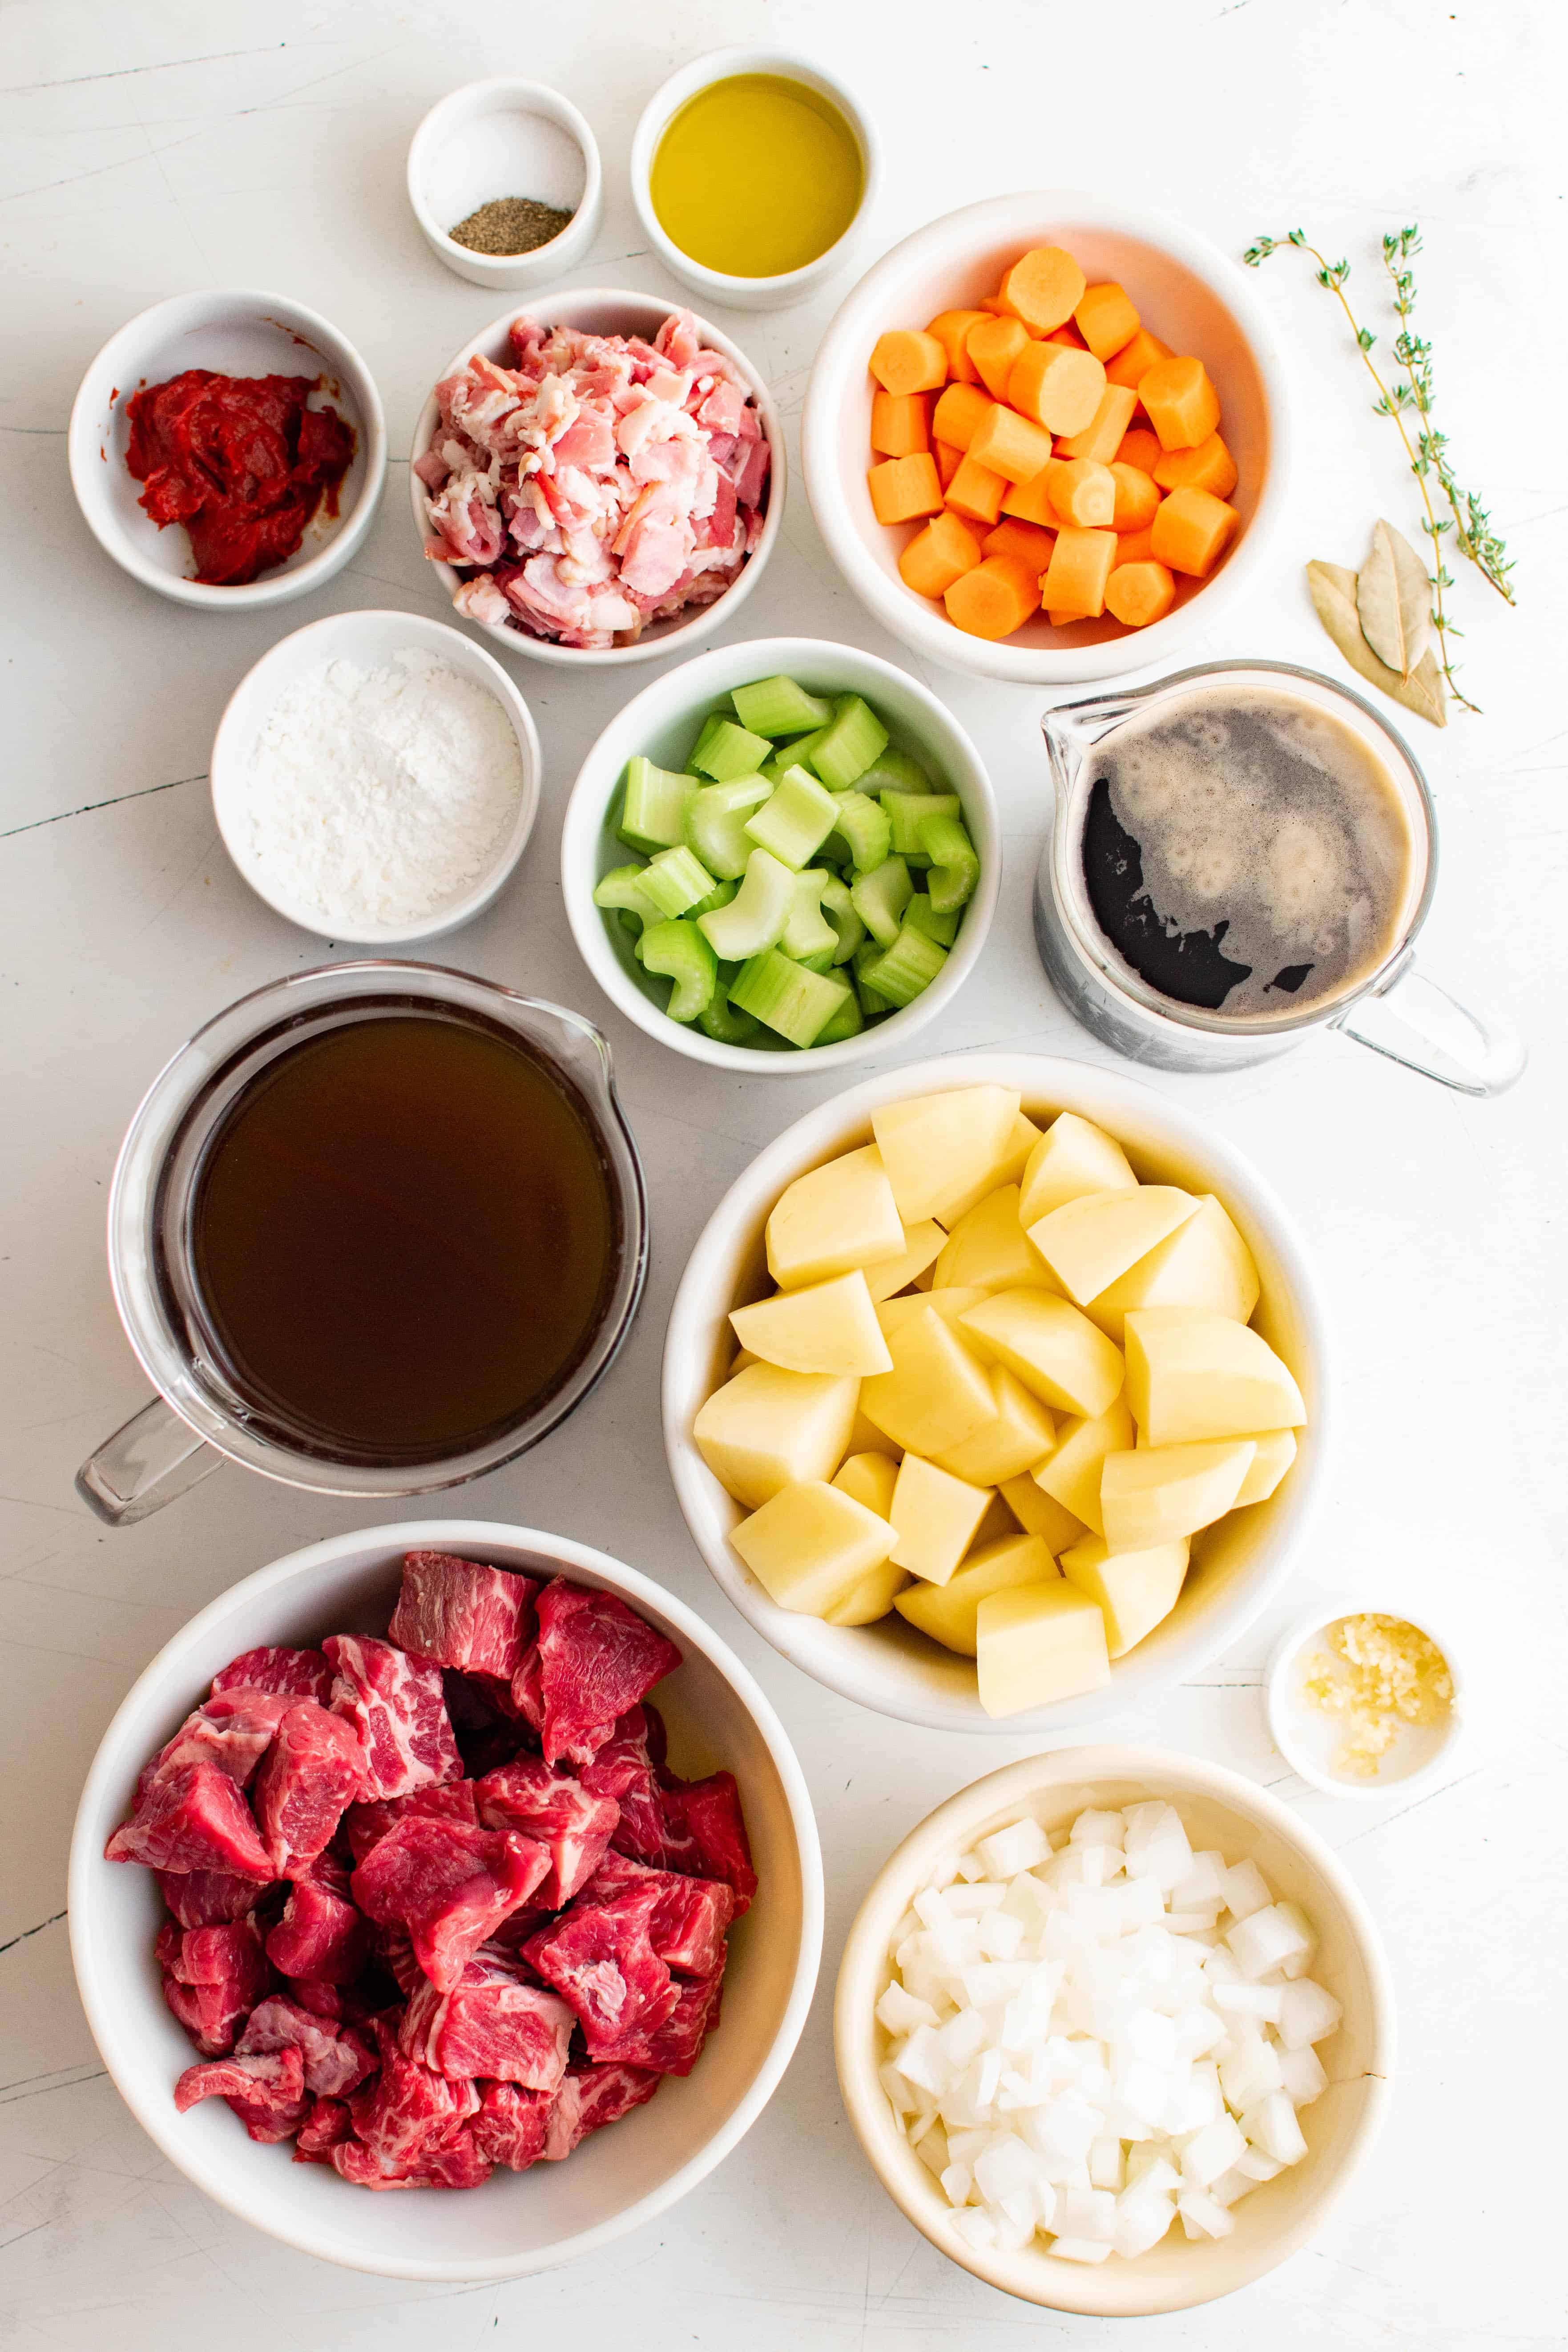 Ingredients for traditional Guinness beef stew measured out and set aside in individual serving bowls.